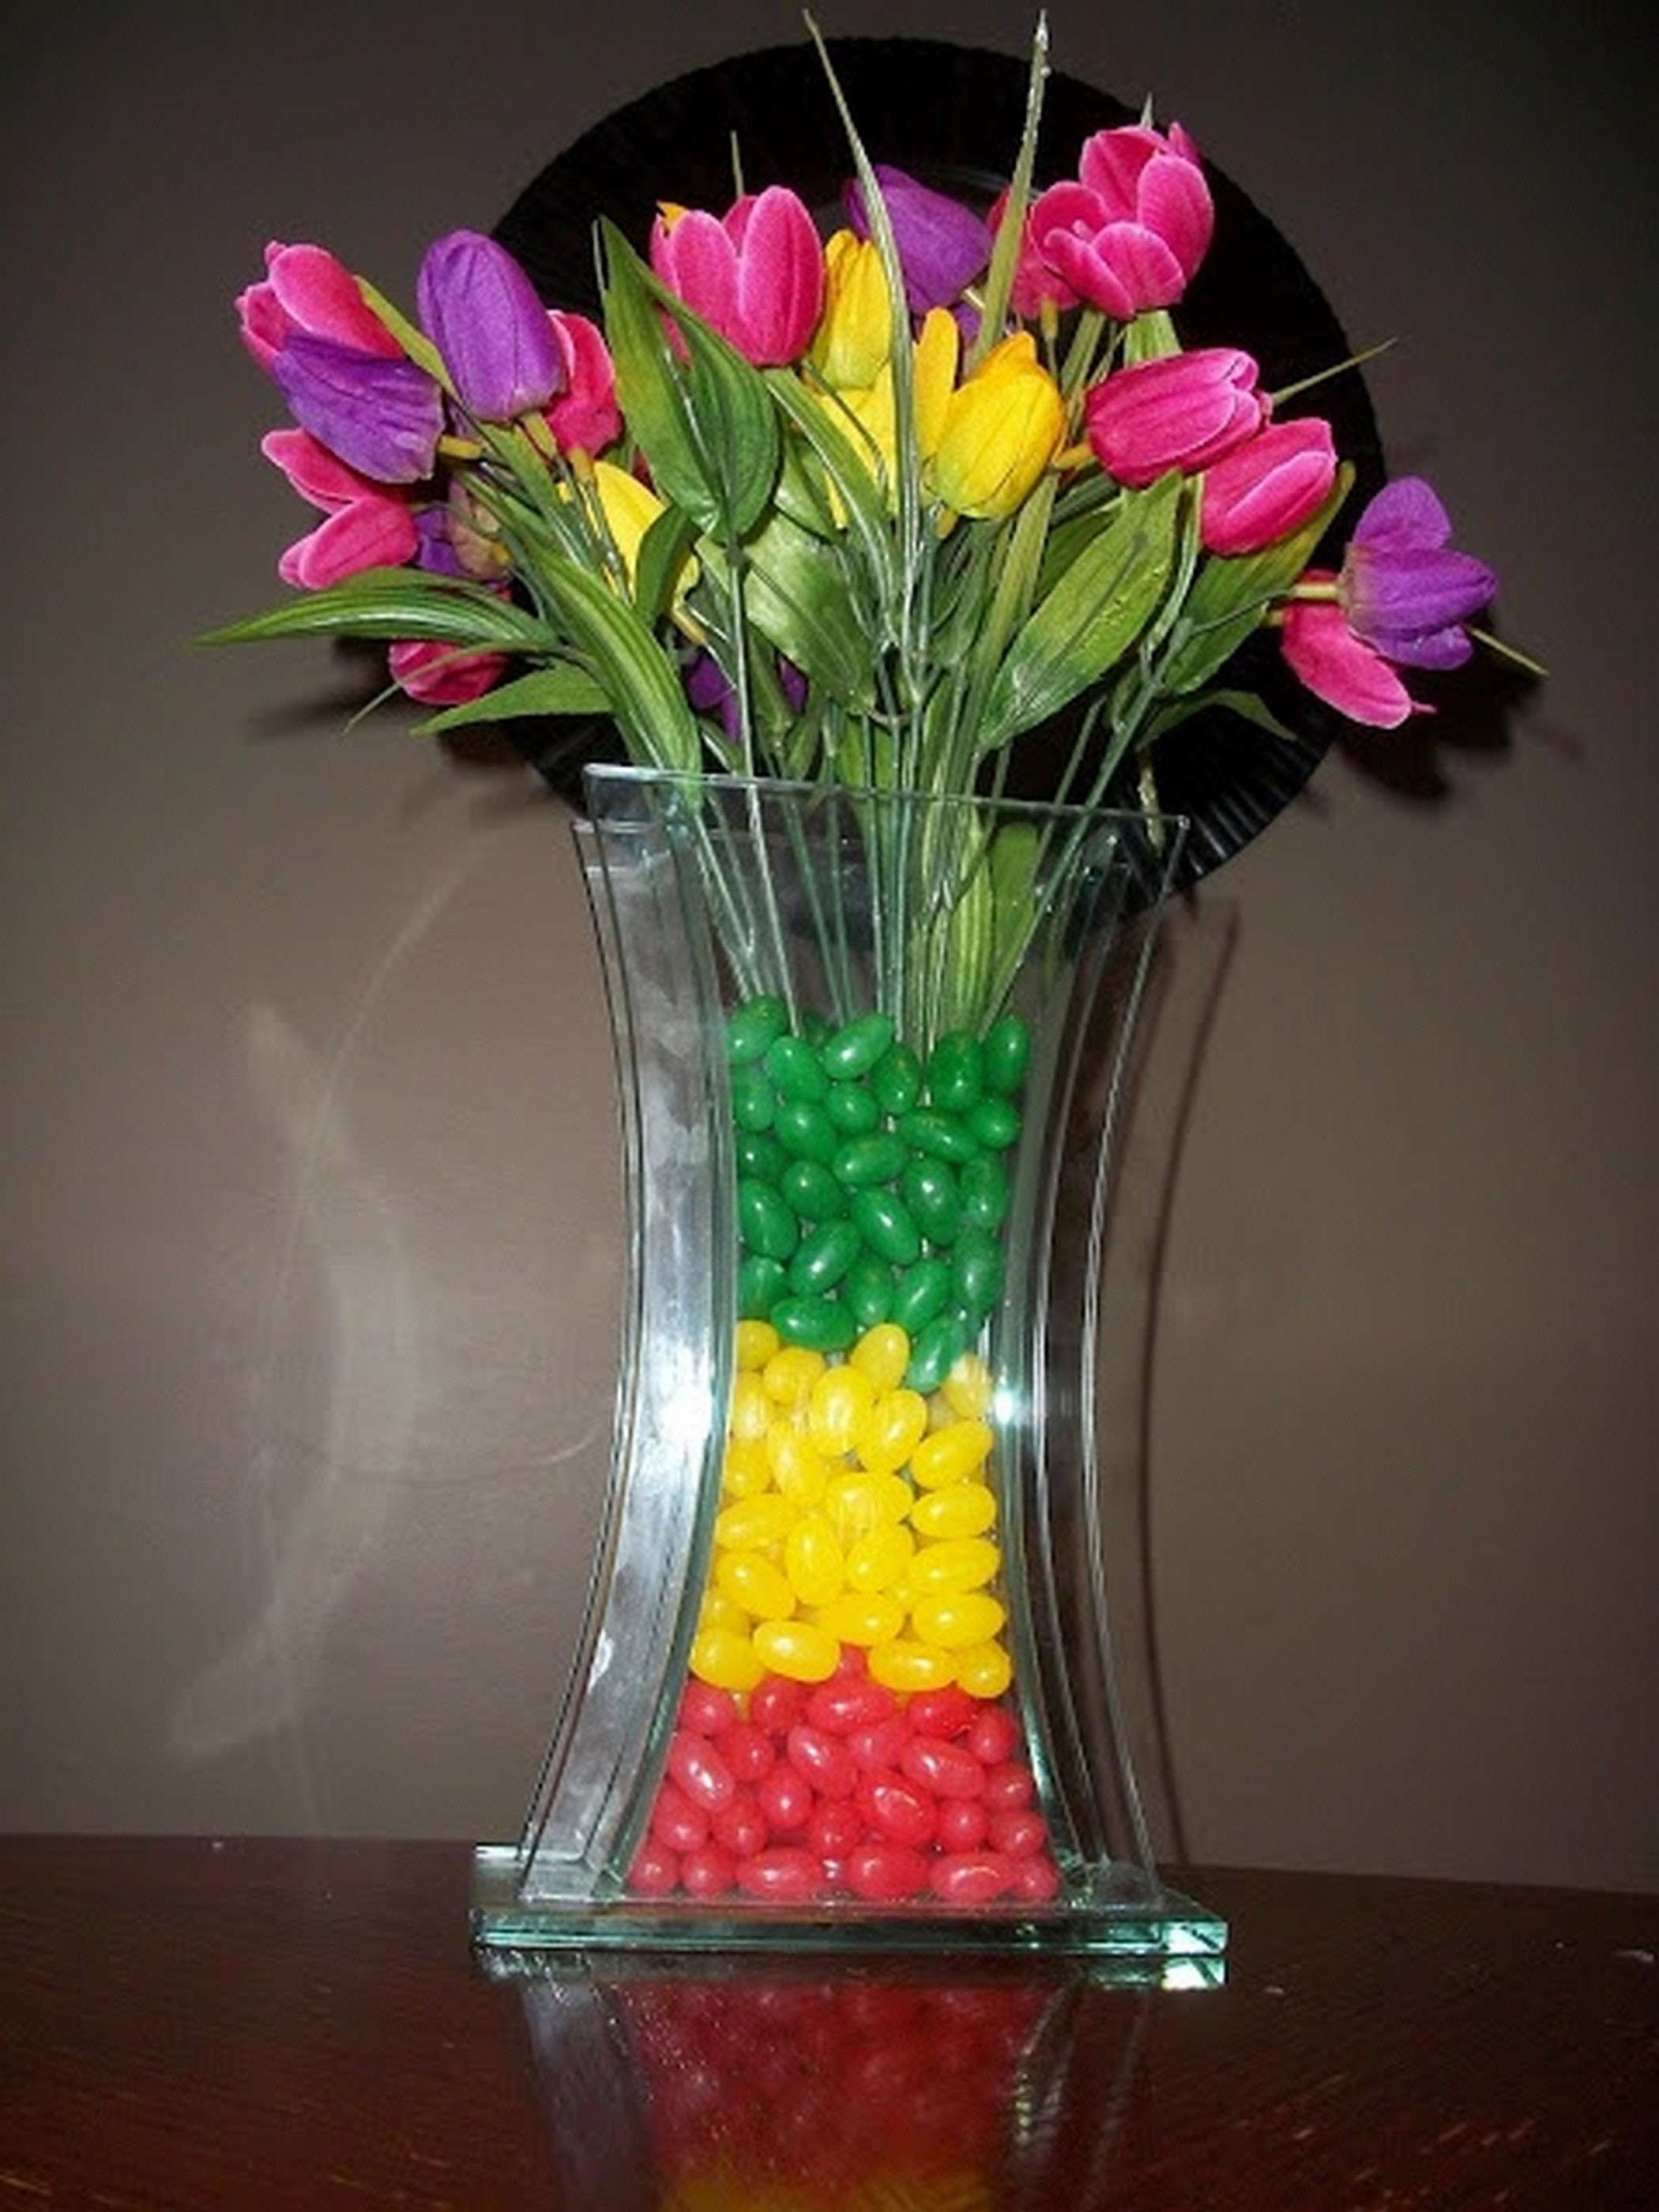 17 Lovely Decorative Vase Filler Ideas 2024 free download decorative vase filler ideas of decorative vase fillers pictures 15 cheap and easy diy vase filler regarding decorative vase fillers pictures 15 cheap and easy diy vase filler ideas 3h vases